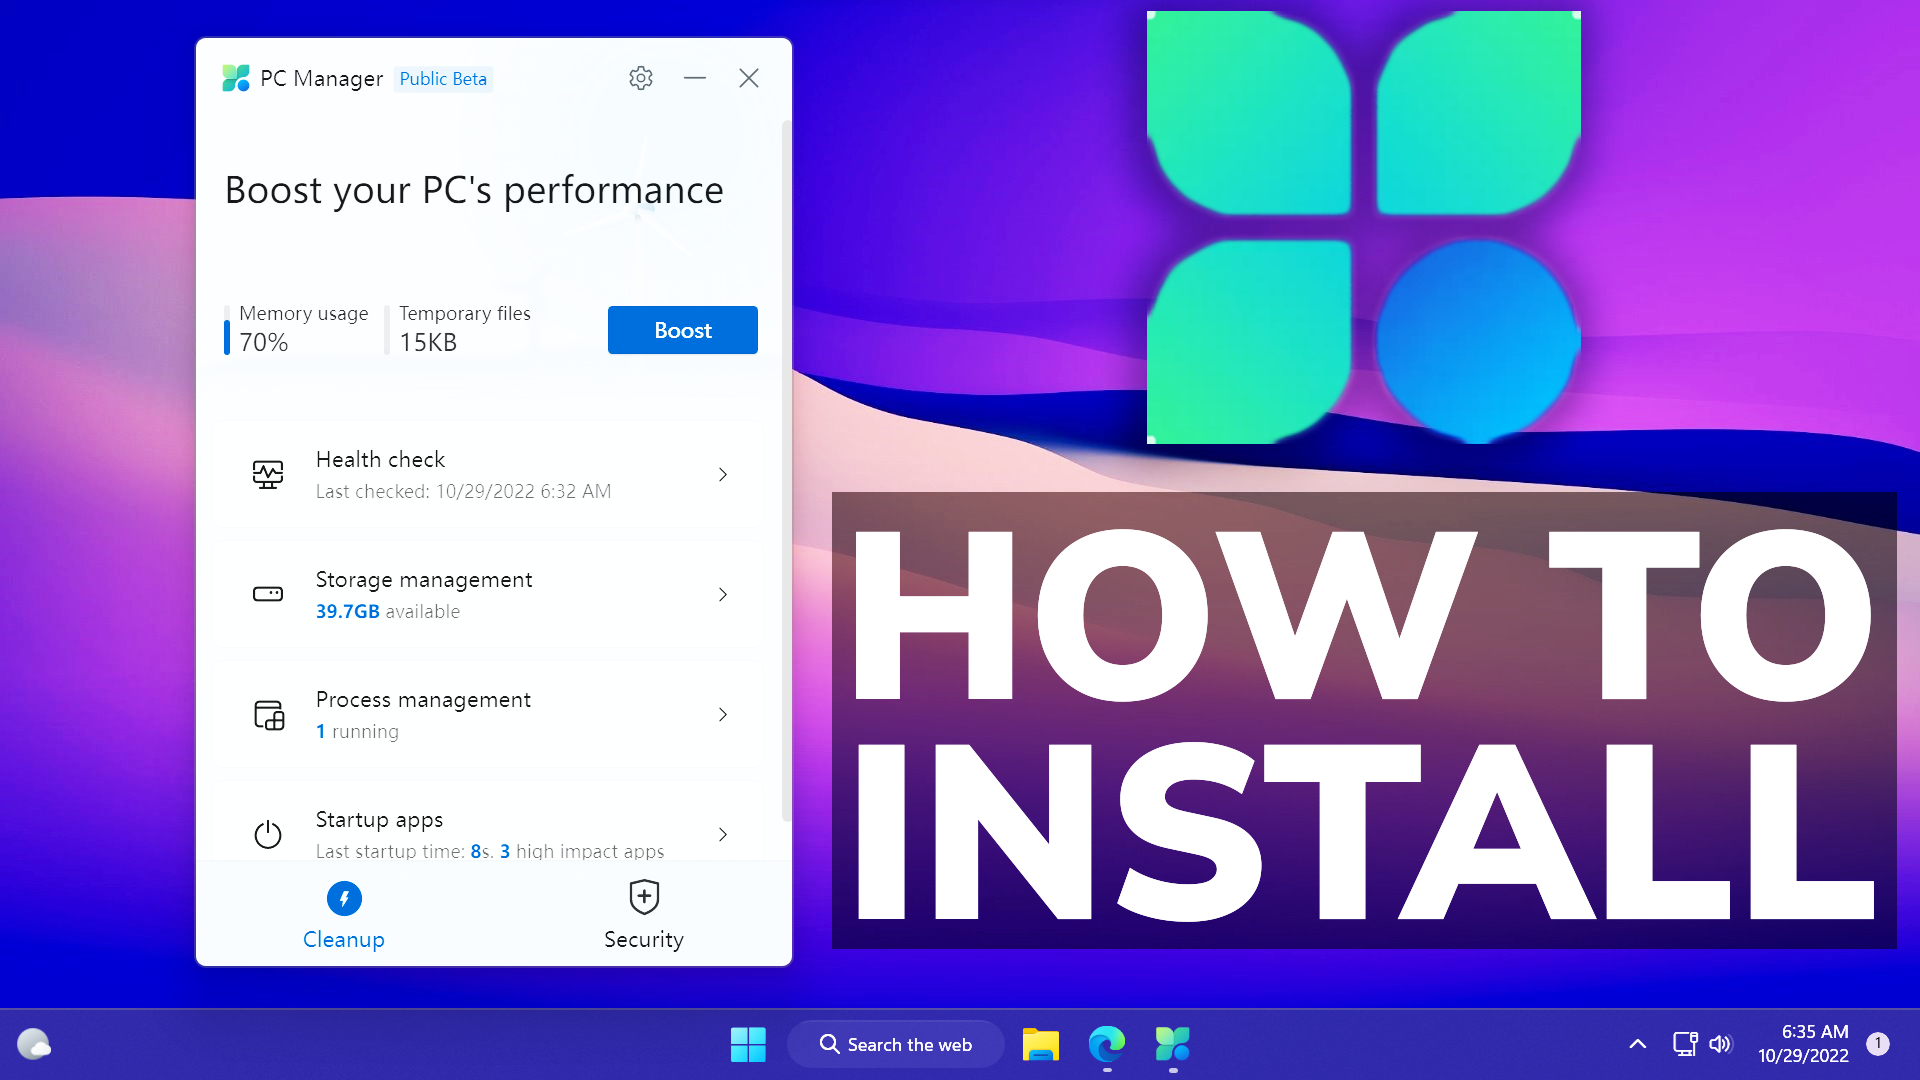 PC Manager 3.6.3.0 instal the new for windows